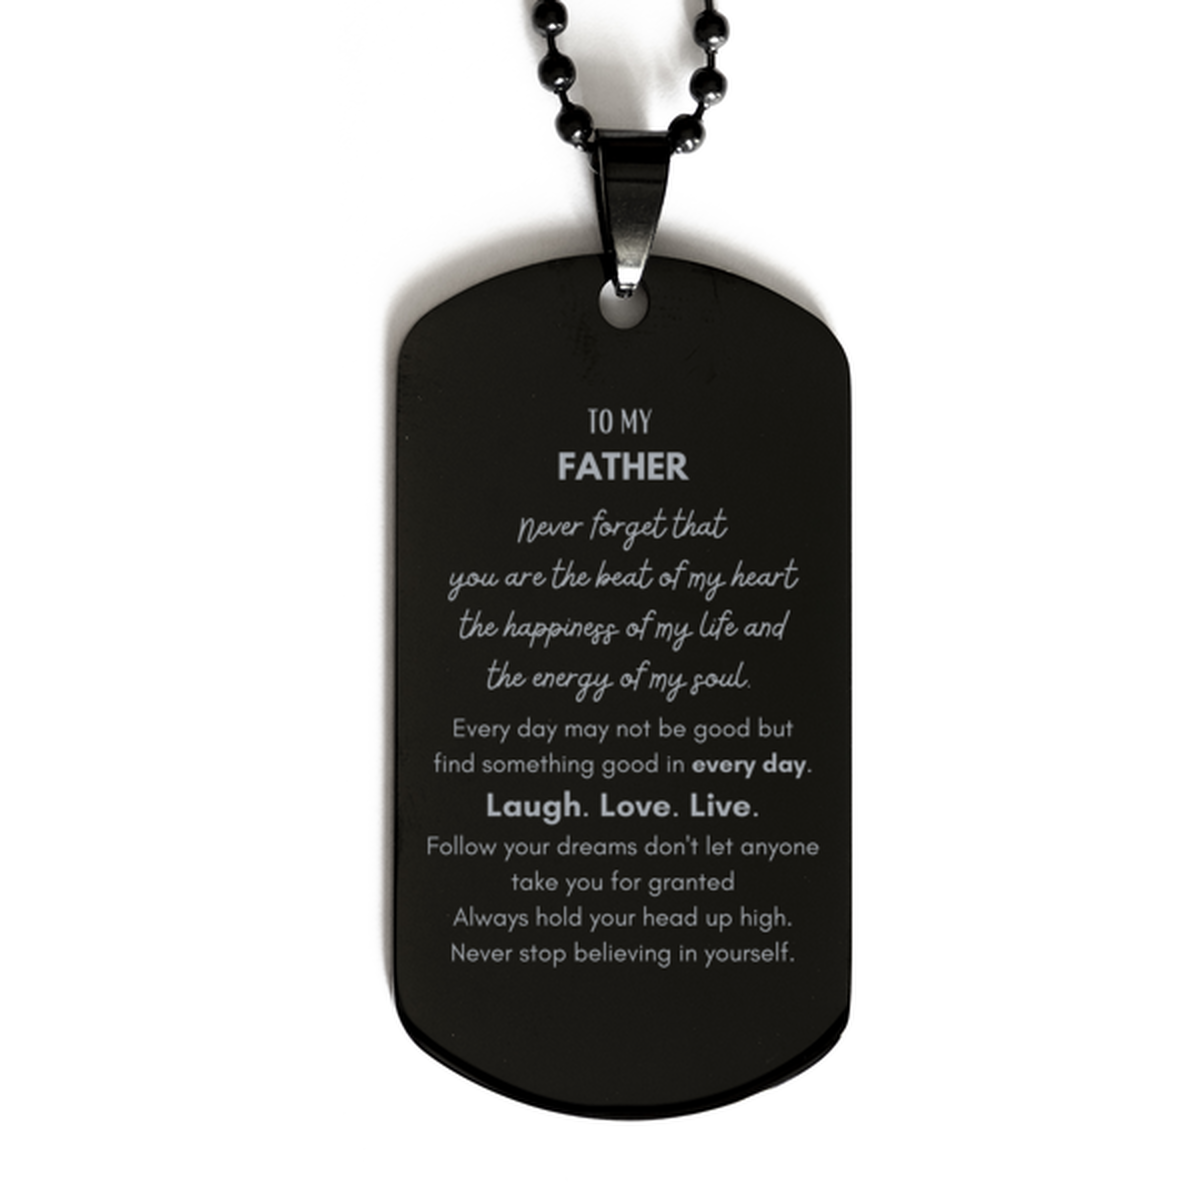 To My Father Dogtag Gifts, Christmas Father Black Dog Tag Present, Birthday Unique Motivational For Father, To My Father Never forget that you are the beat of my heart the happiness of my life and the energy of my soul